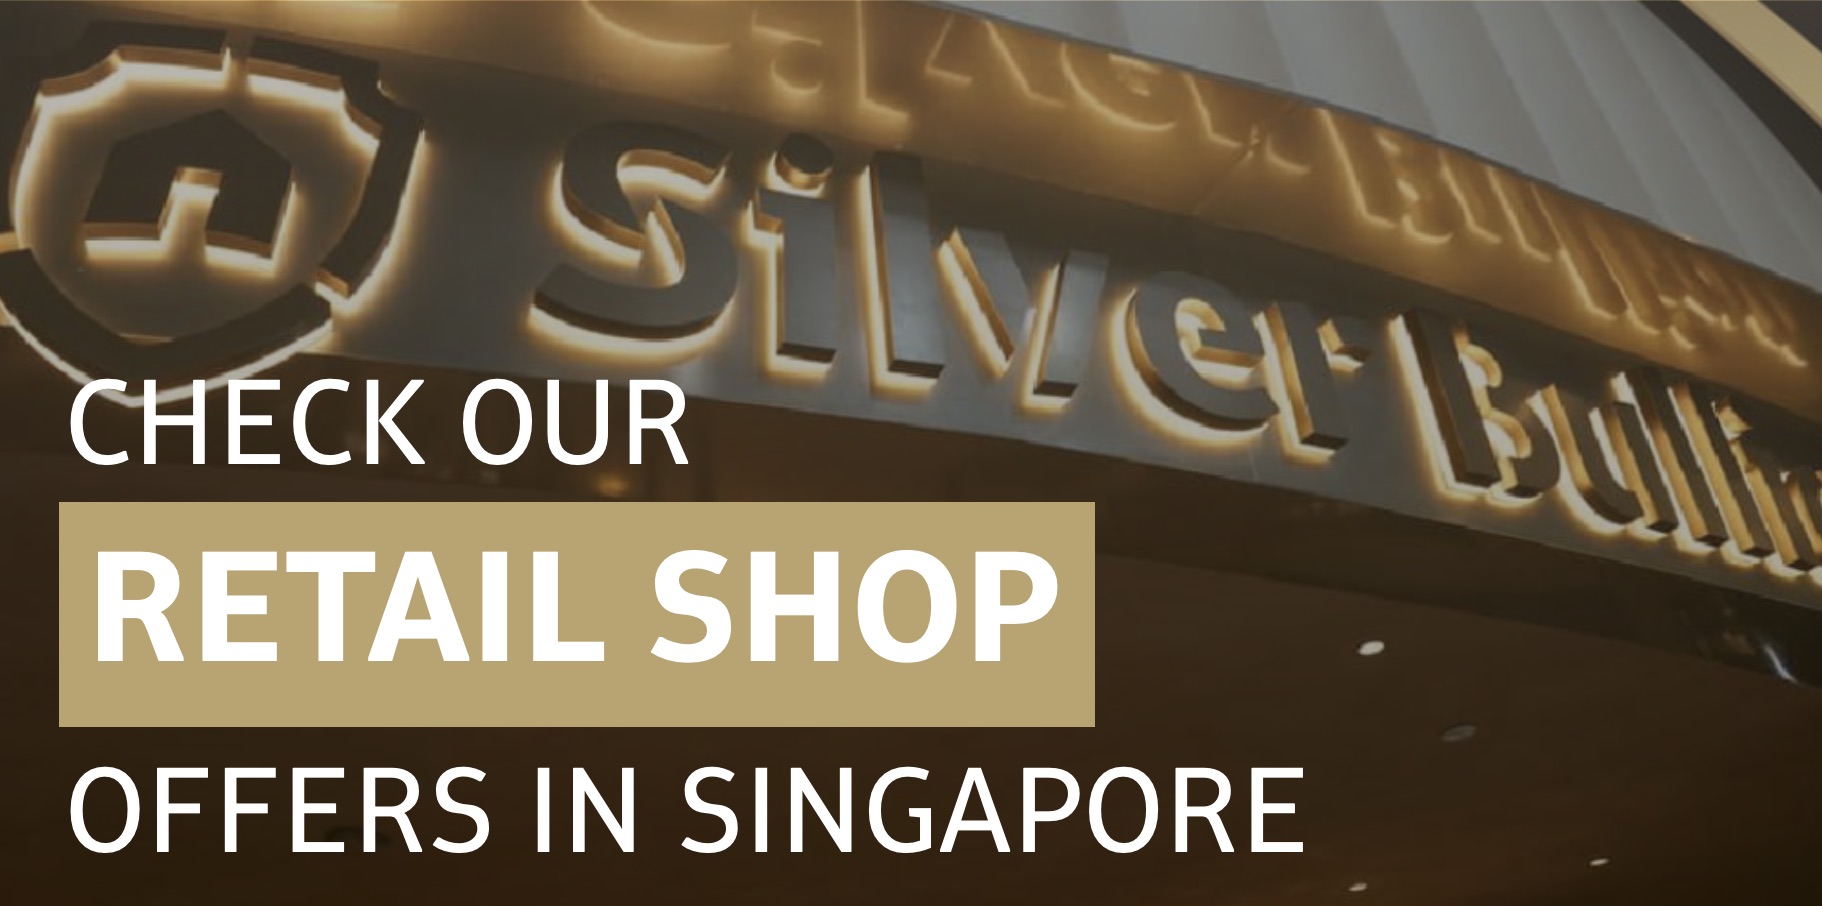 Check our Retail Shop offers in Singapore